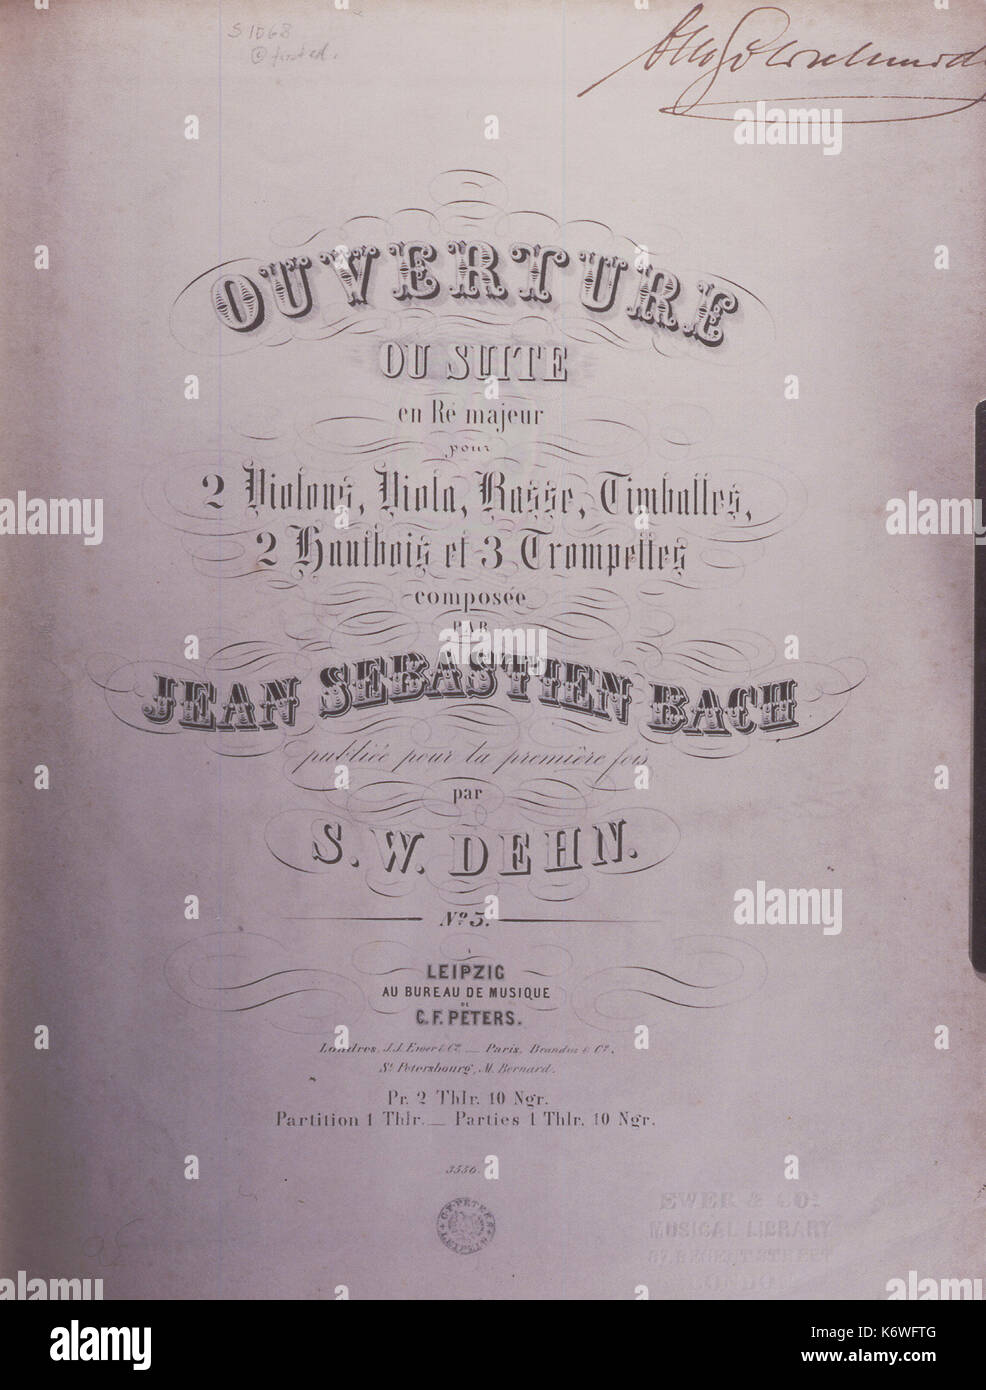 BACH, Johann Sebastian  (German composer & organist, 21 March 1685 - 28 July 1750 ) - SUITE no 3 in D Major.  Titlepage of Bach's Overture/Suite, BWV 1068, published by Peters, Leipzig, 1854. (Says 1st time published).  Includes 'Air on the G String' Stock Photo